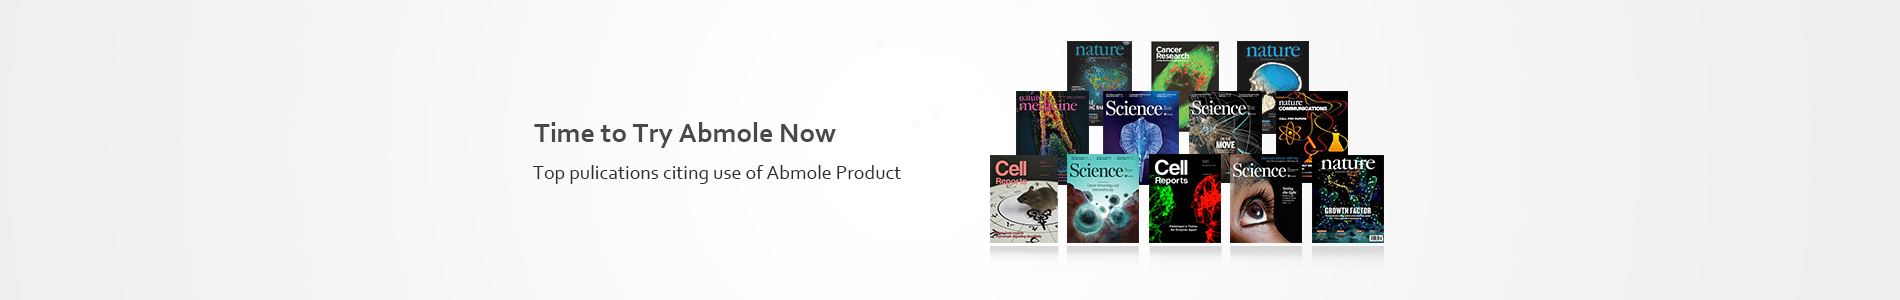 AbMole products have been cited in many studies from top scientific journals